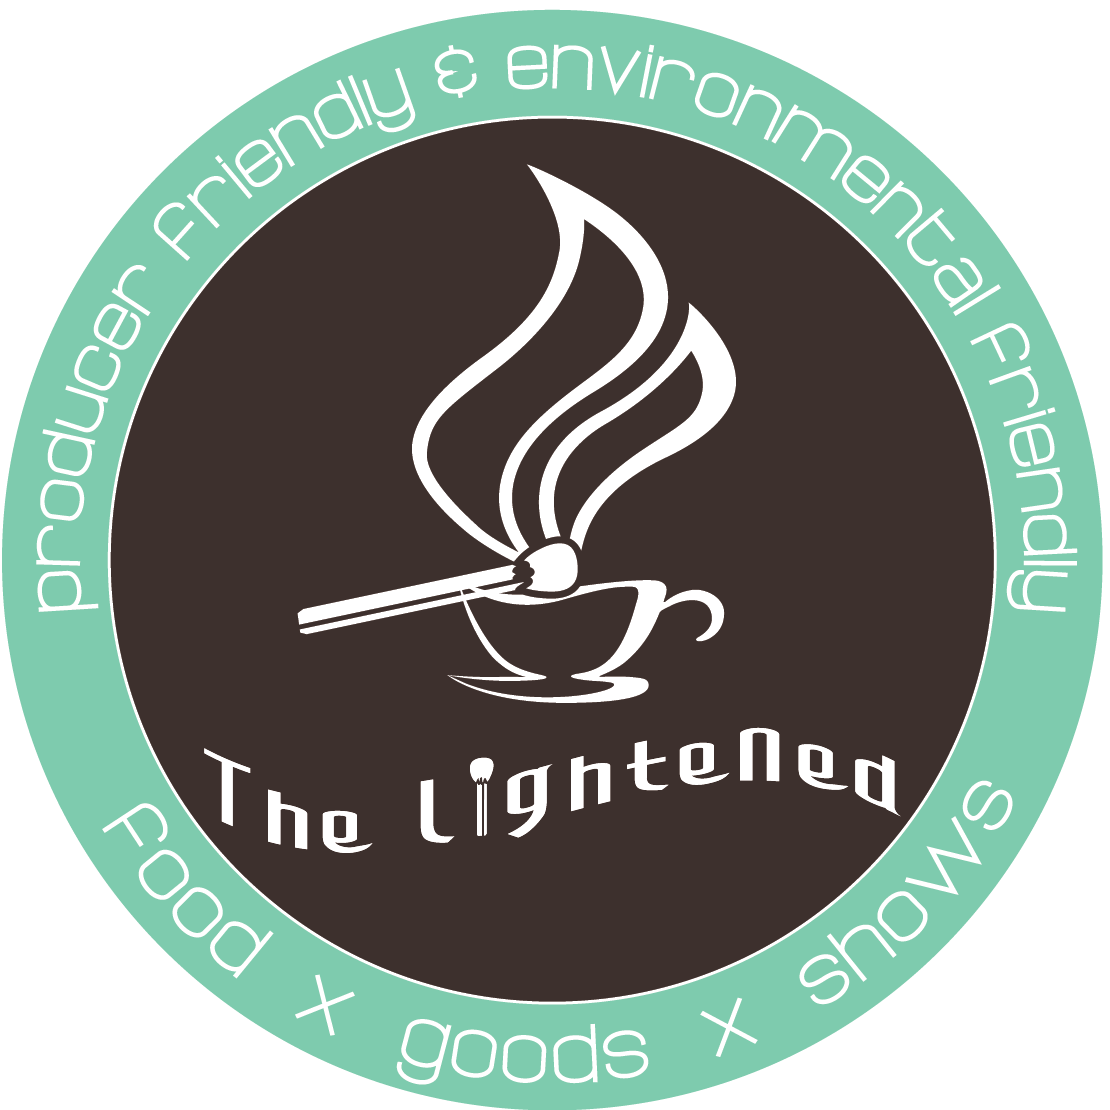 The lightened Cafe